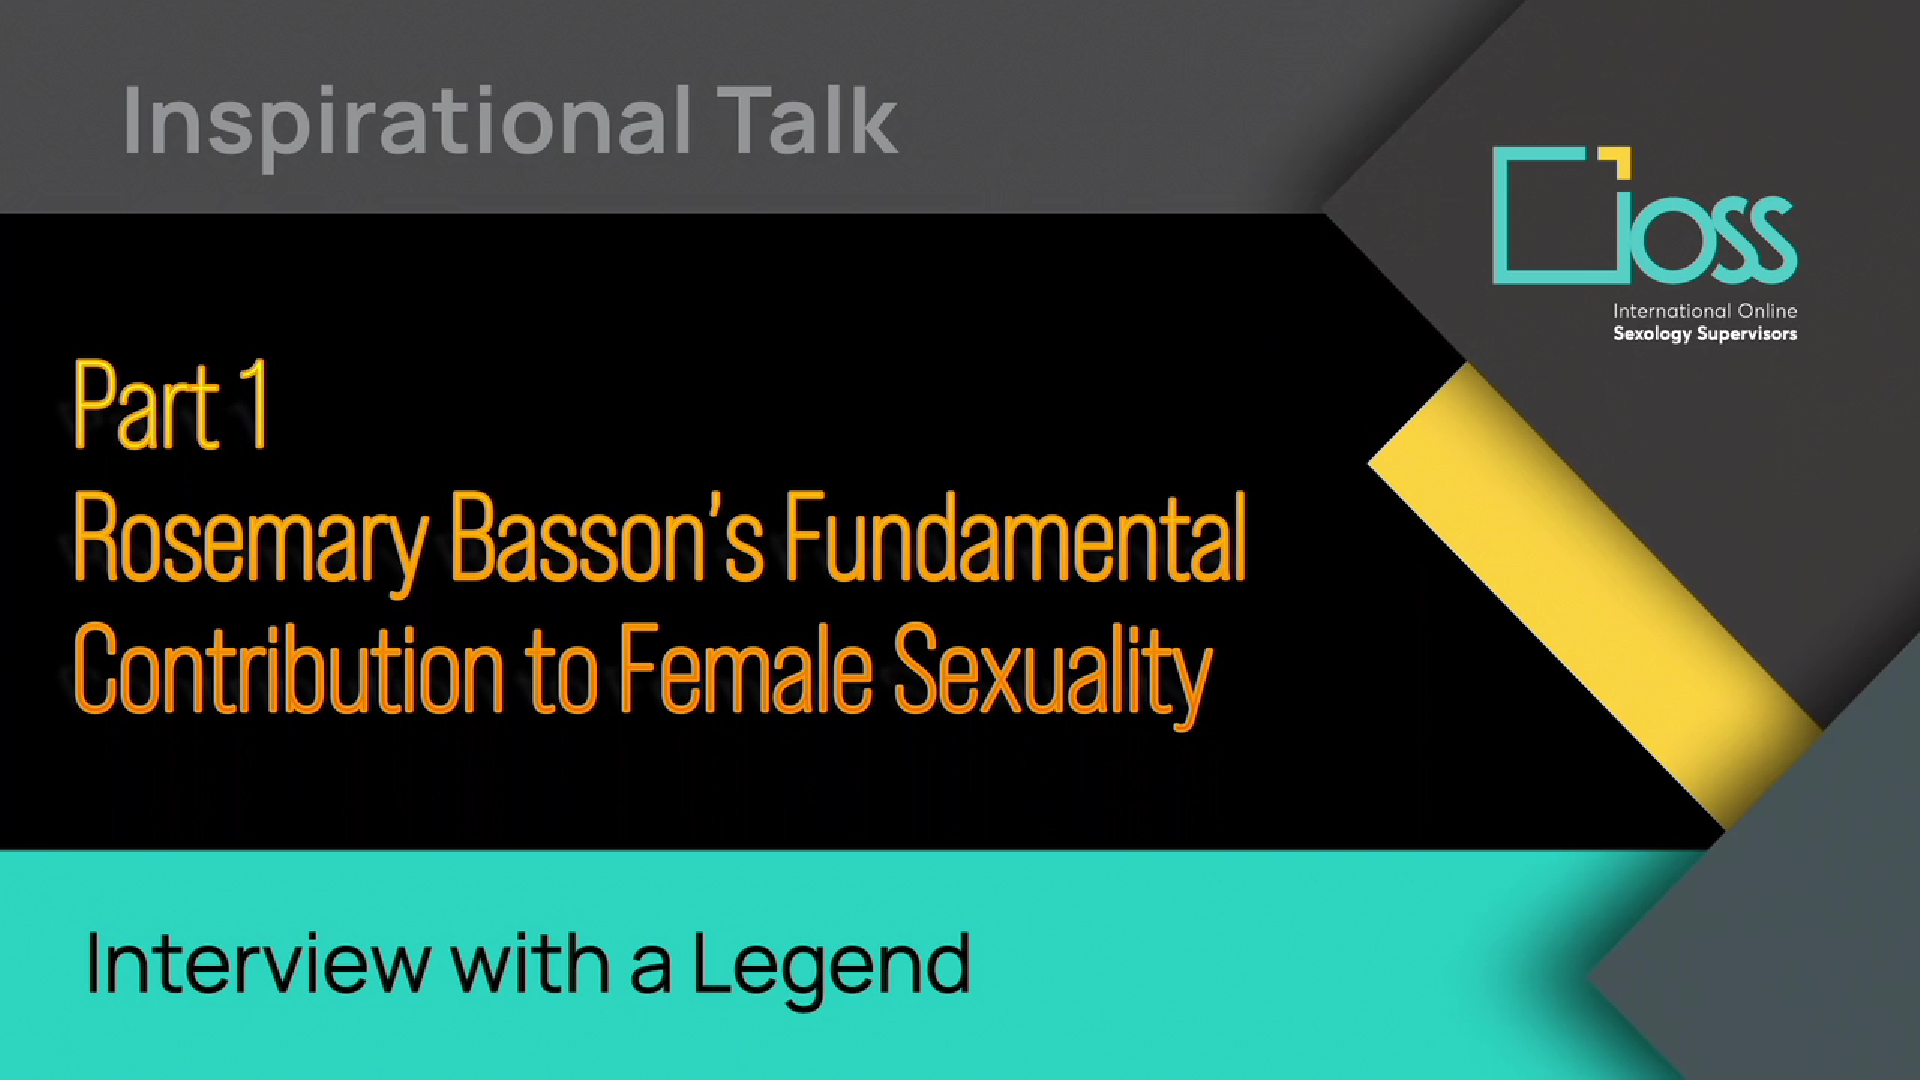 Part 1 Rosemary Basson’s Fundamental Contribution to Female Sexuality (Part 1 & 2)